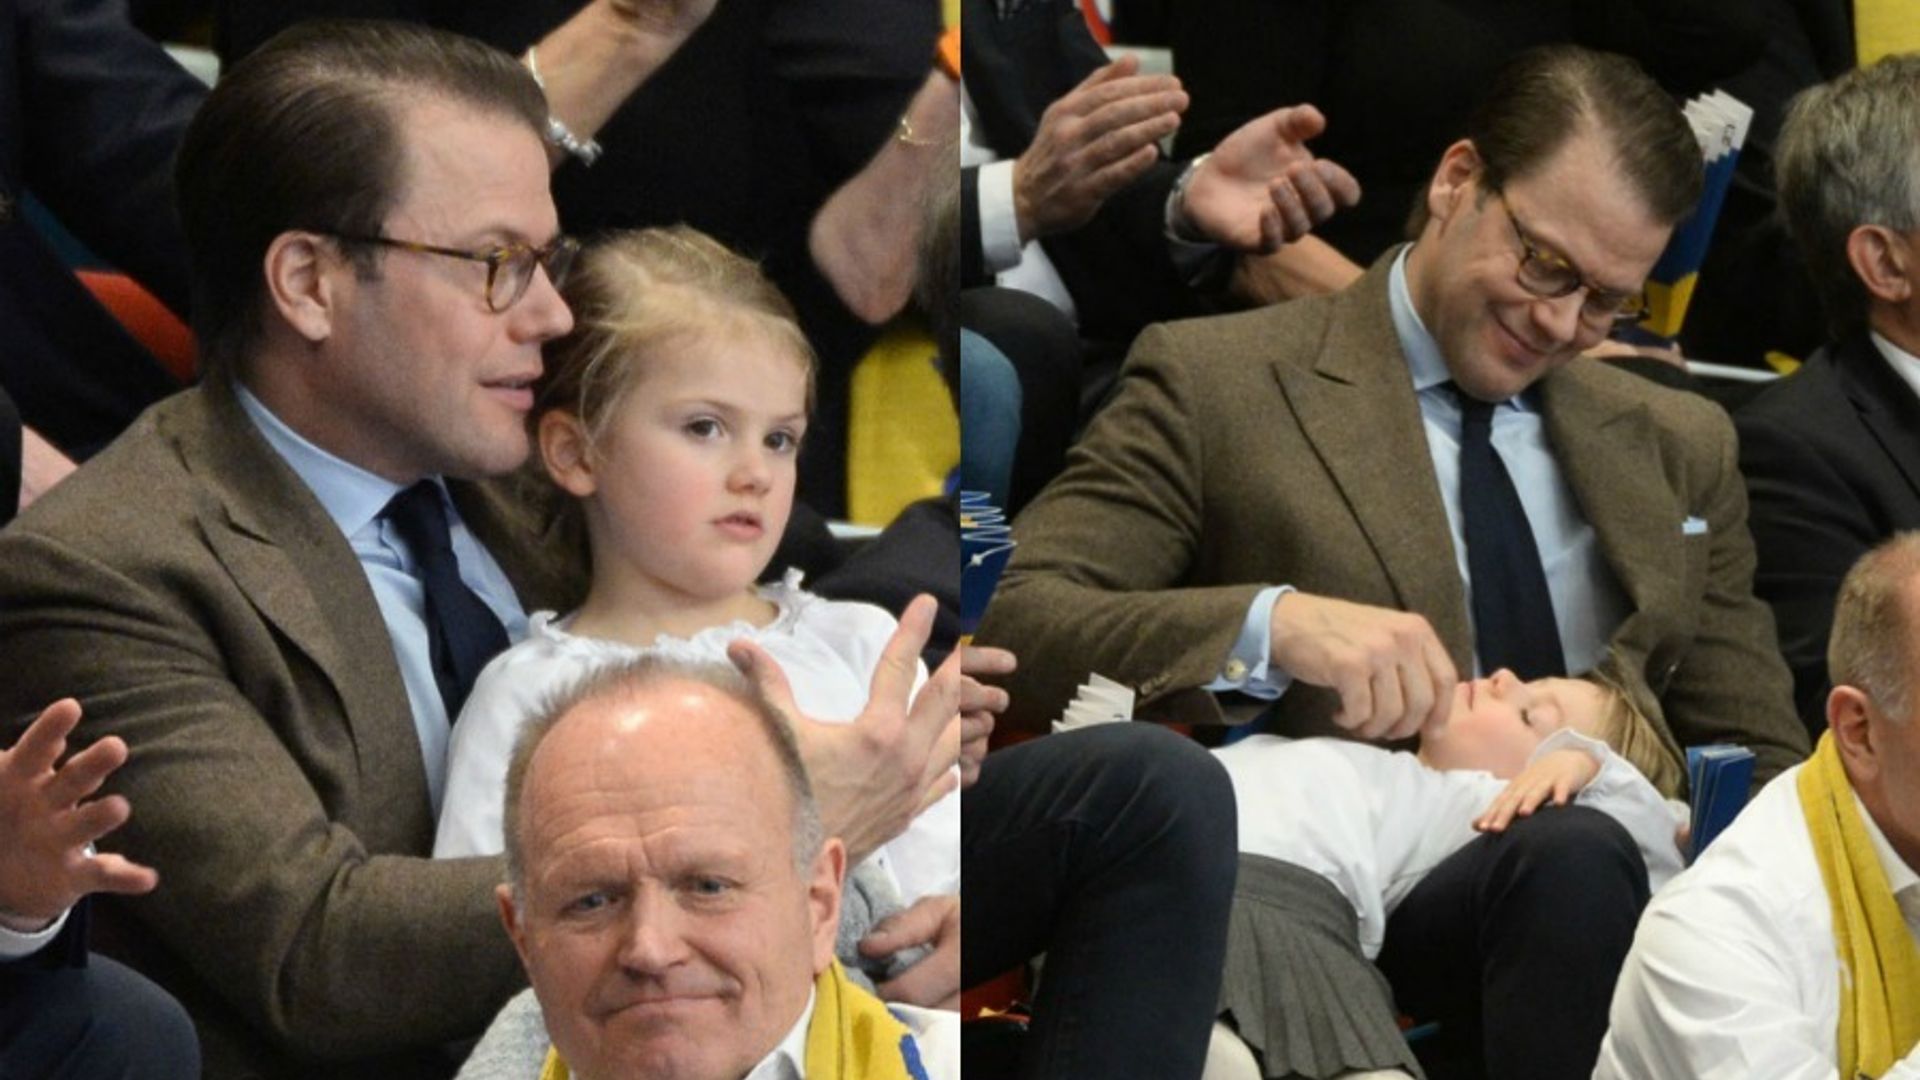 Princess Estelle couldn't help falling asleep on dad Prince Daniel's lap at evening sporting event